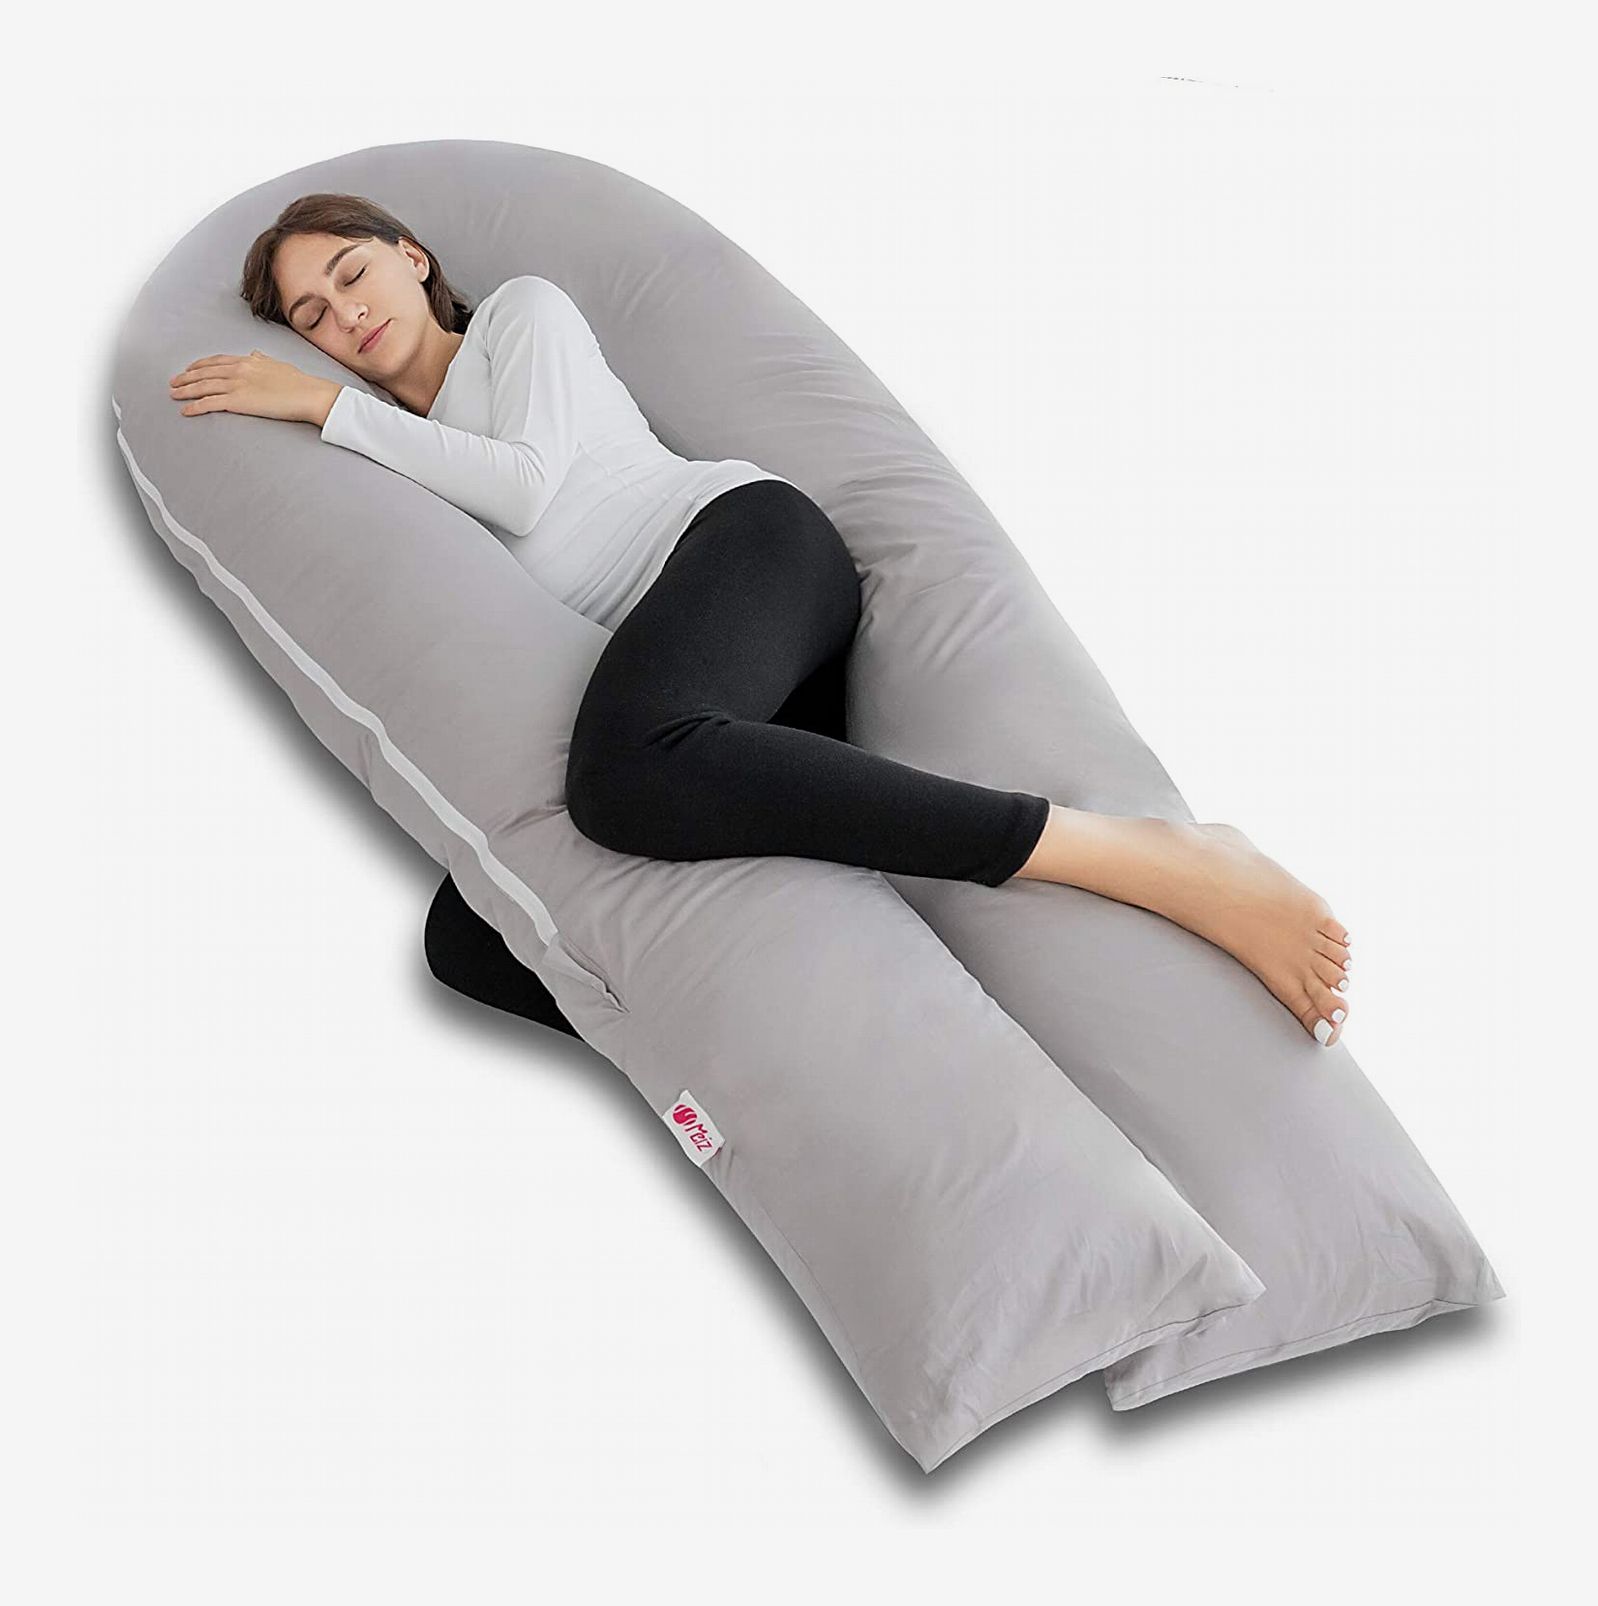 Pregnancy Body Details about   A Pregnancy Pillow The Best Pregnancy Pillow for Sleeping Prone 